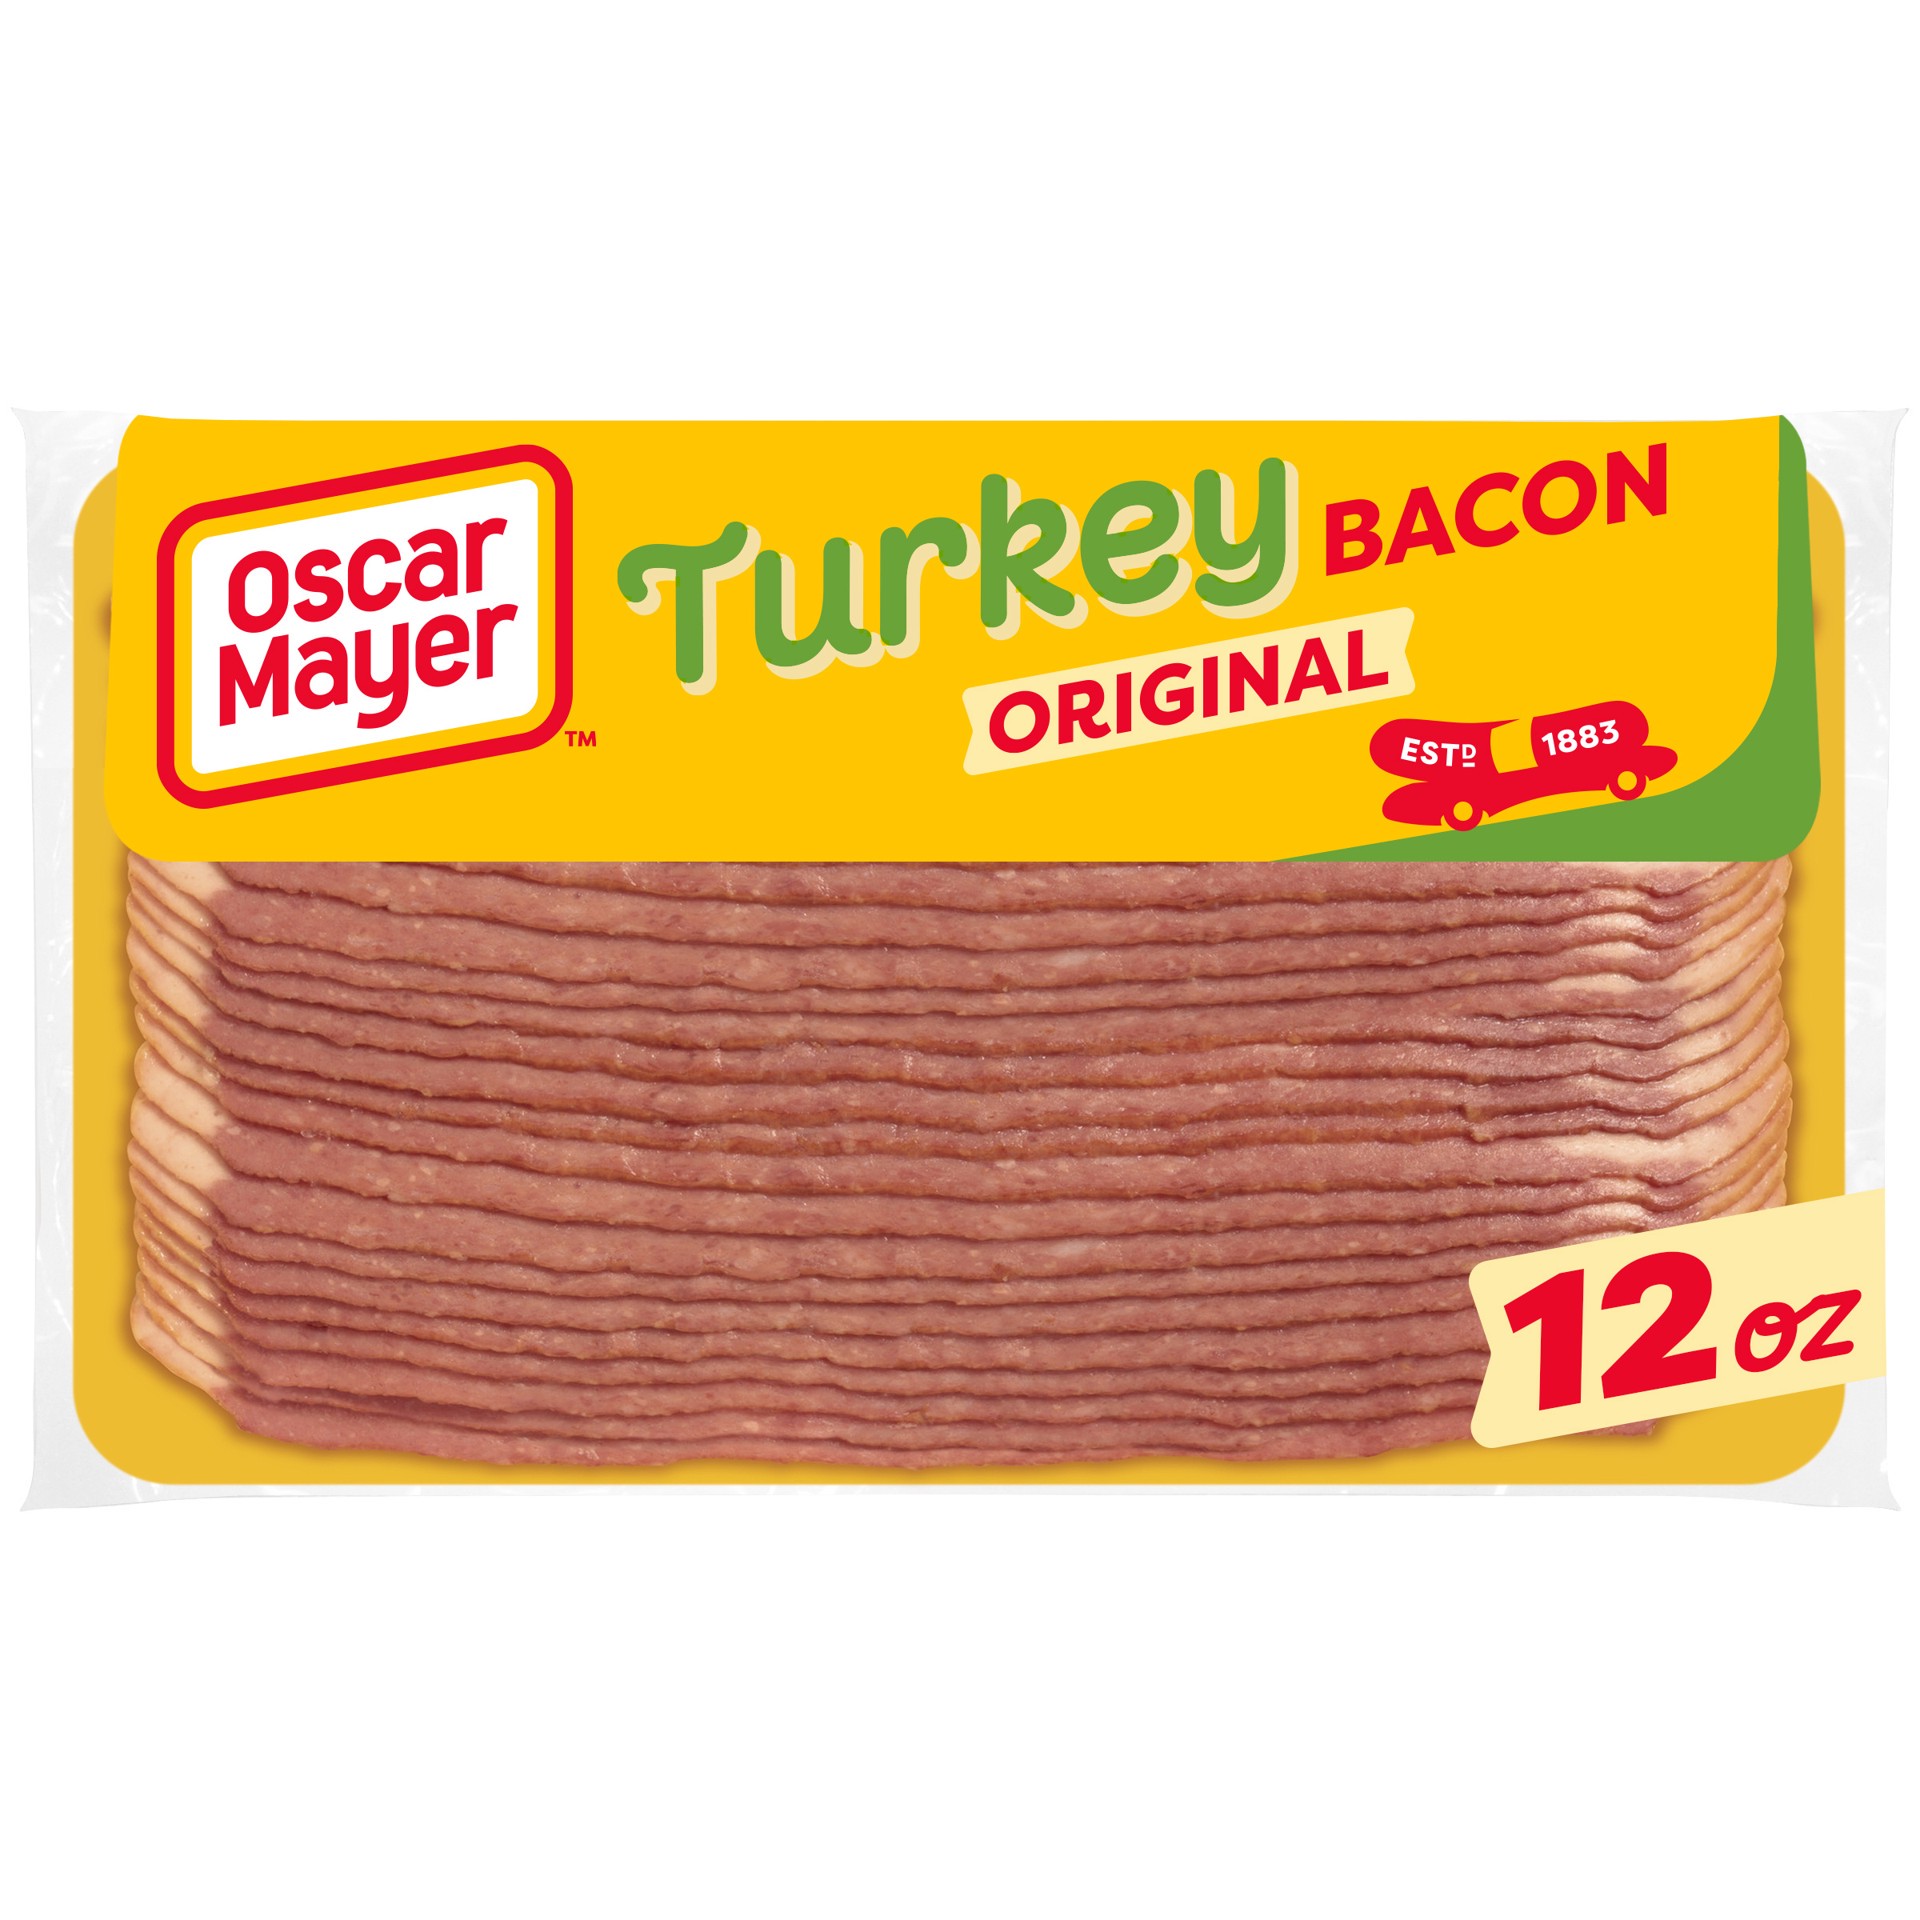 slide 1 of 20, Oscar Mayer Fully Cooked & Gluten Free Turkey Bacon with 58% Less Fat & 57% Less Sodium Pack, 21-23 slices, 12 oz